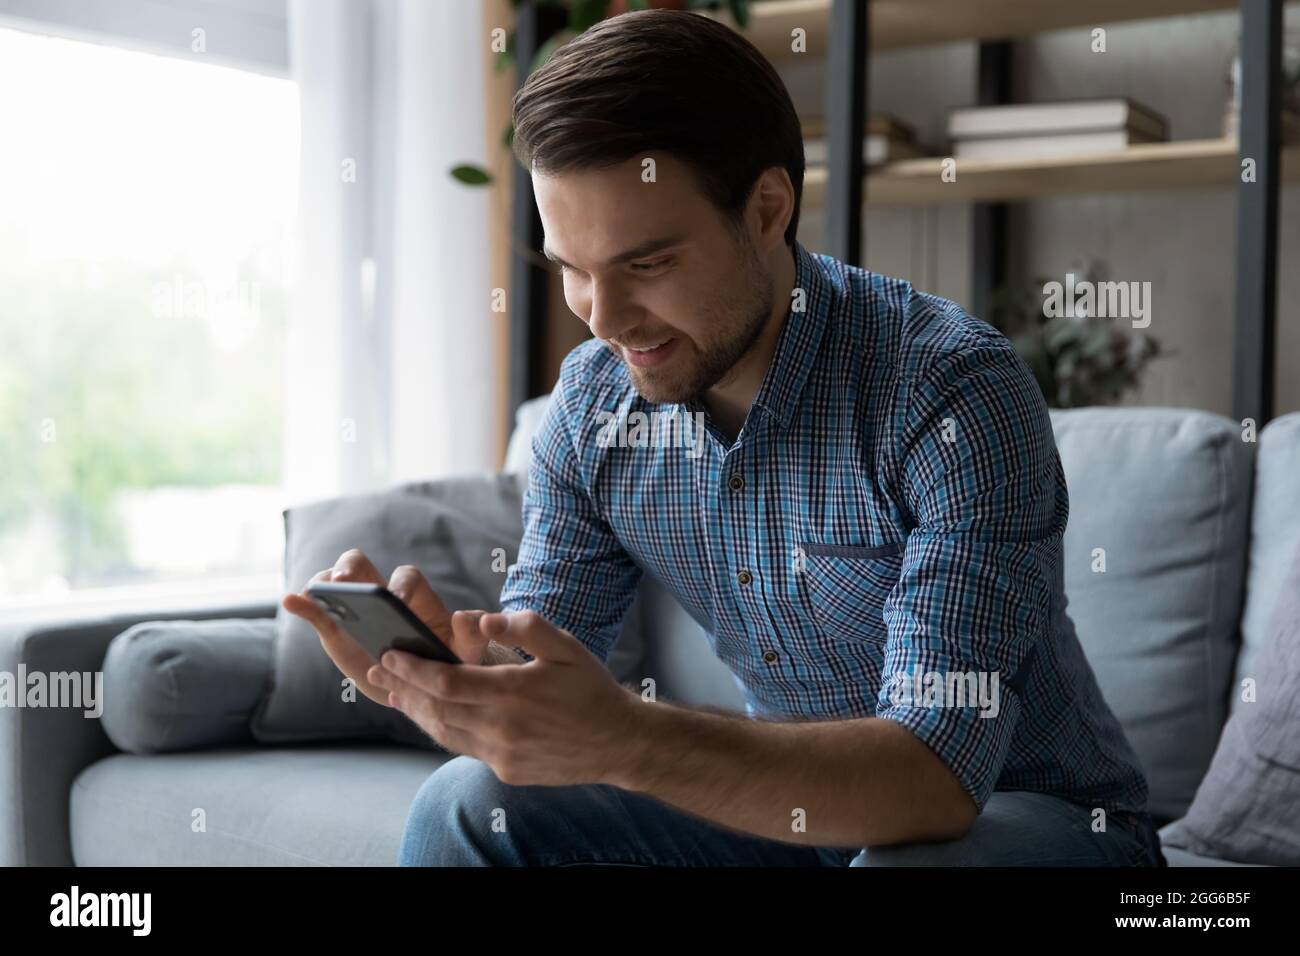 Happy mobile phone user reading text message with good news Stock Photo